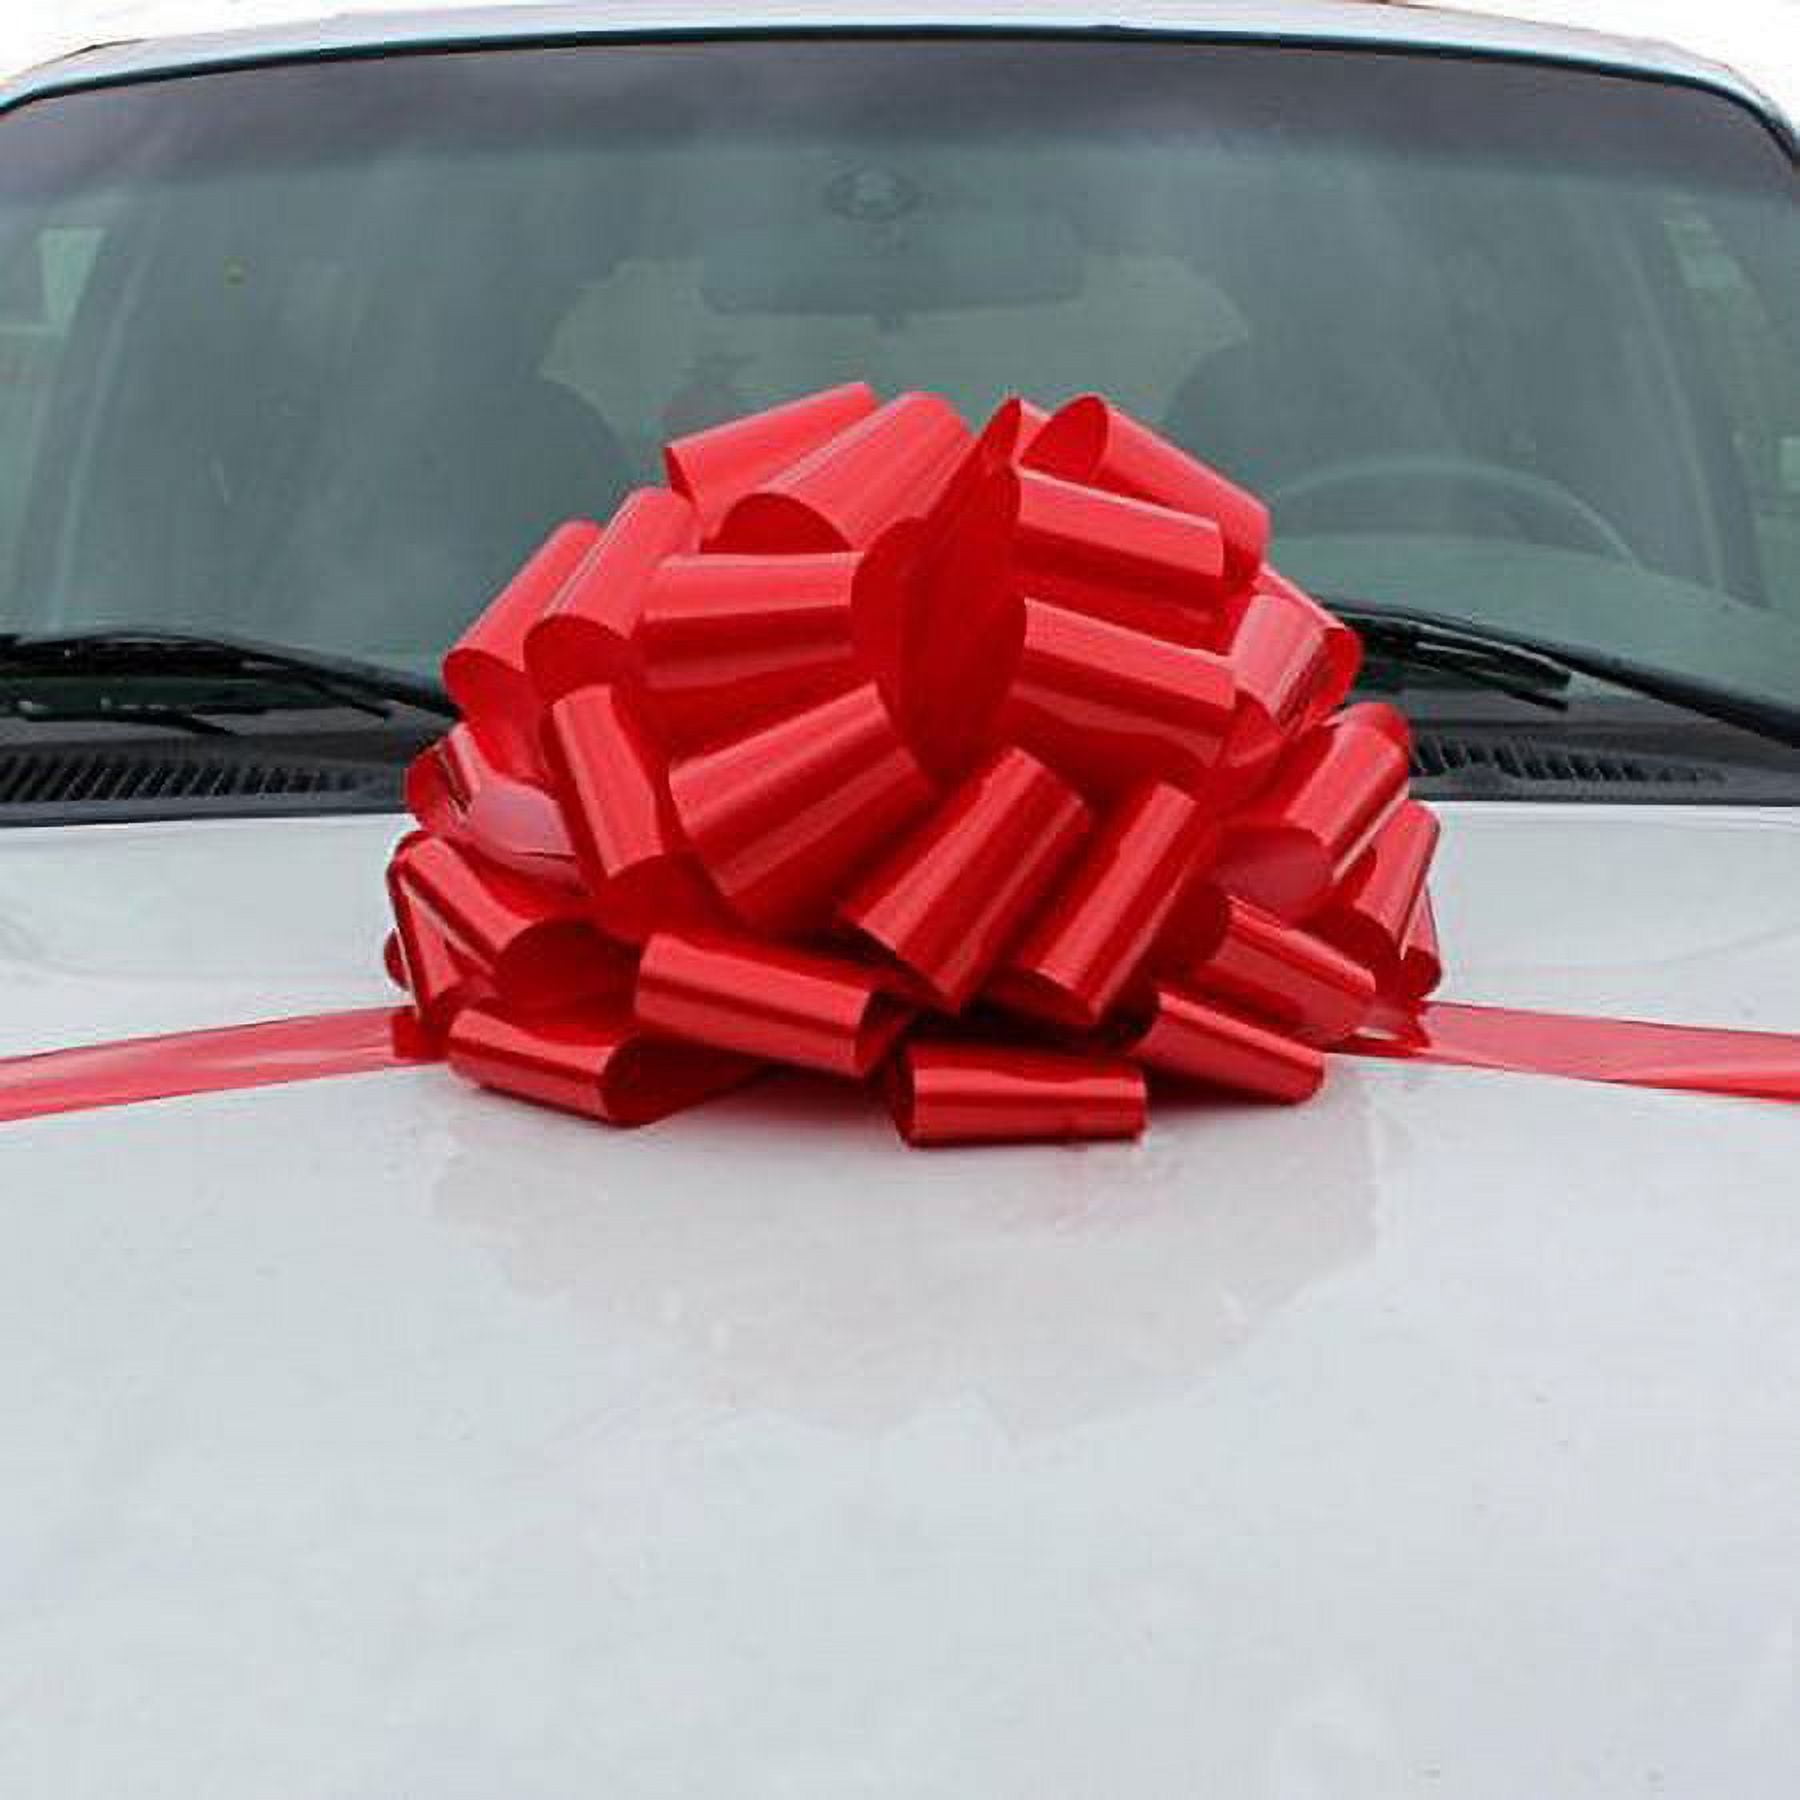 Big Metallic Silver Car Bow - 25 Wide, Fully Assembled, Large Gift Bow,  Christmas, NYE, Birthday 